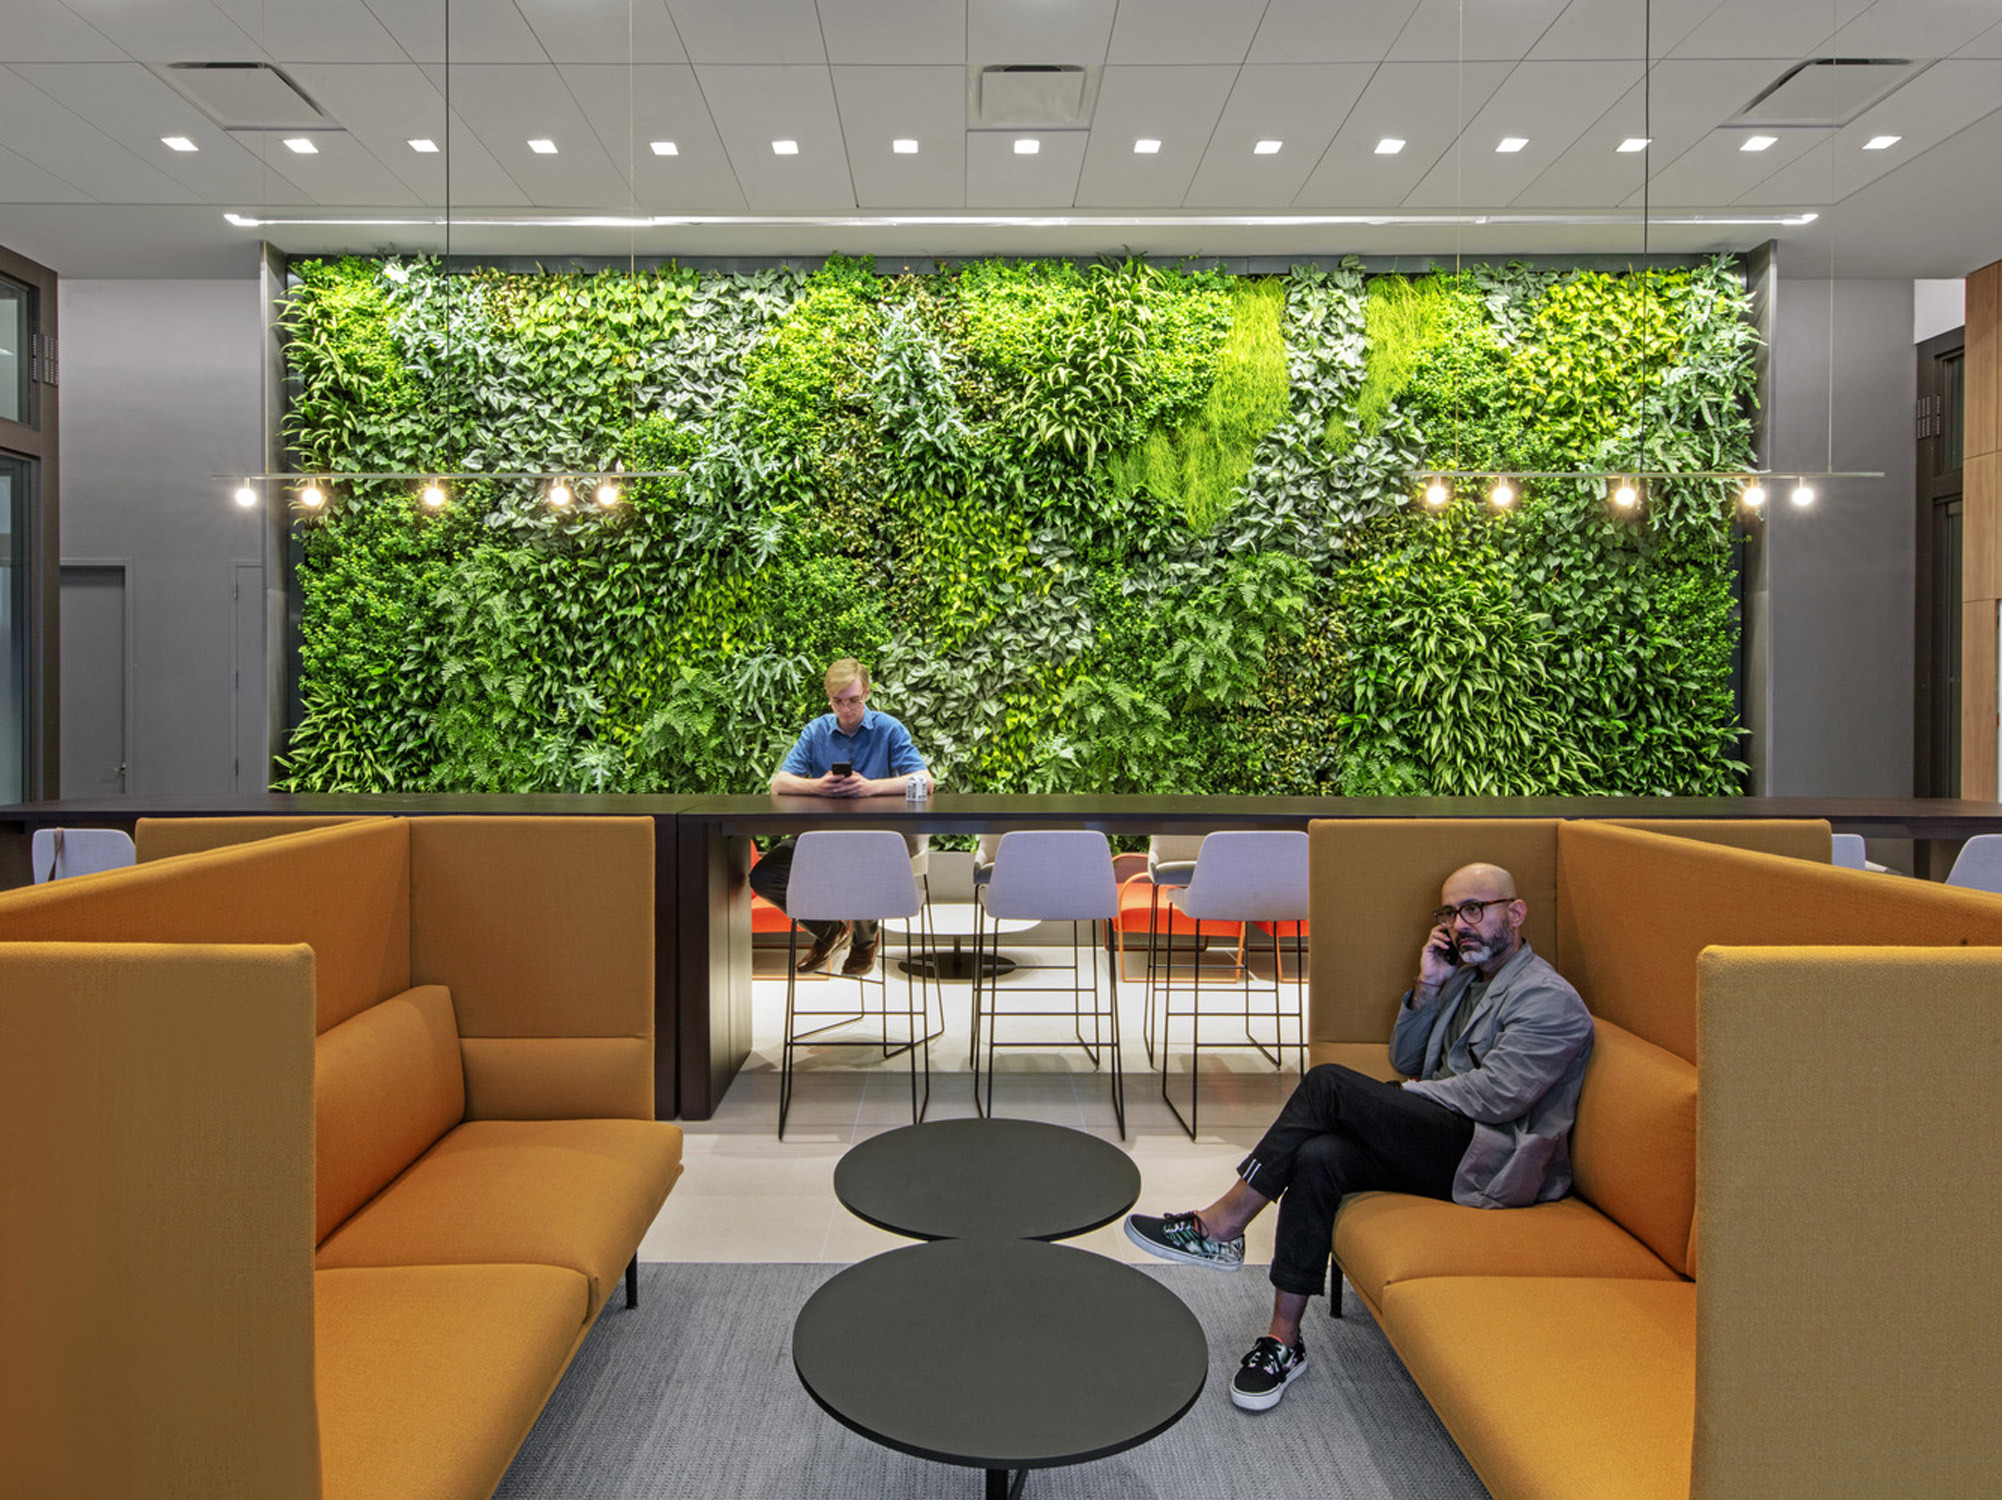 Modern office break area with vibrant, upholstered orange modular seating and a central black coffee table. Two people converse casually, flanked by a lush living green wall, providing a biophilic design element to the contemporary, well-lit space.